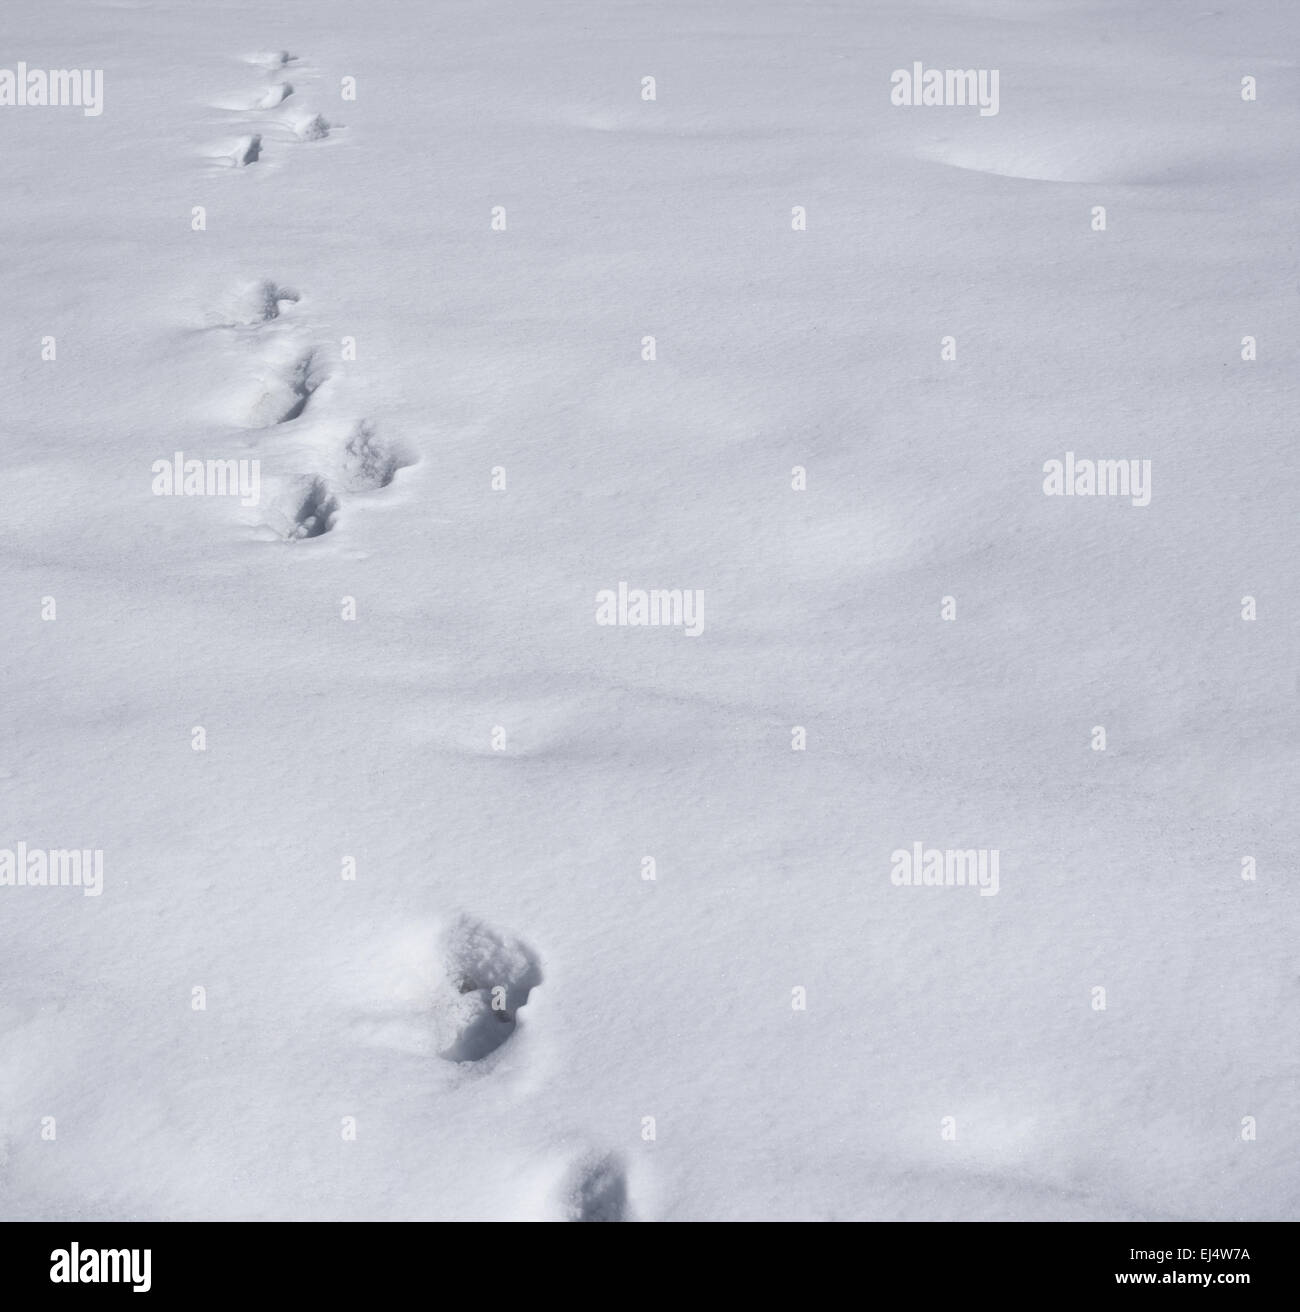 Footprints in a snow composition background Stock Photo